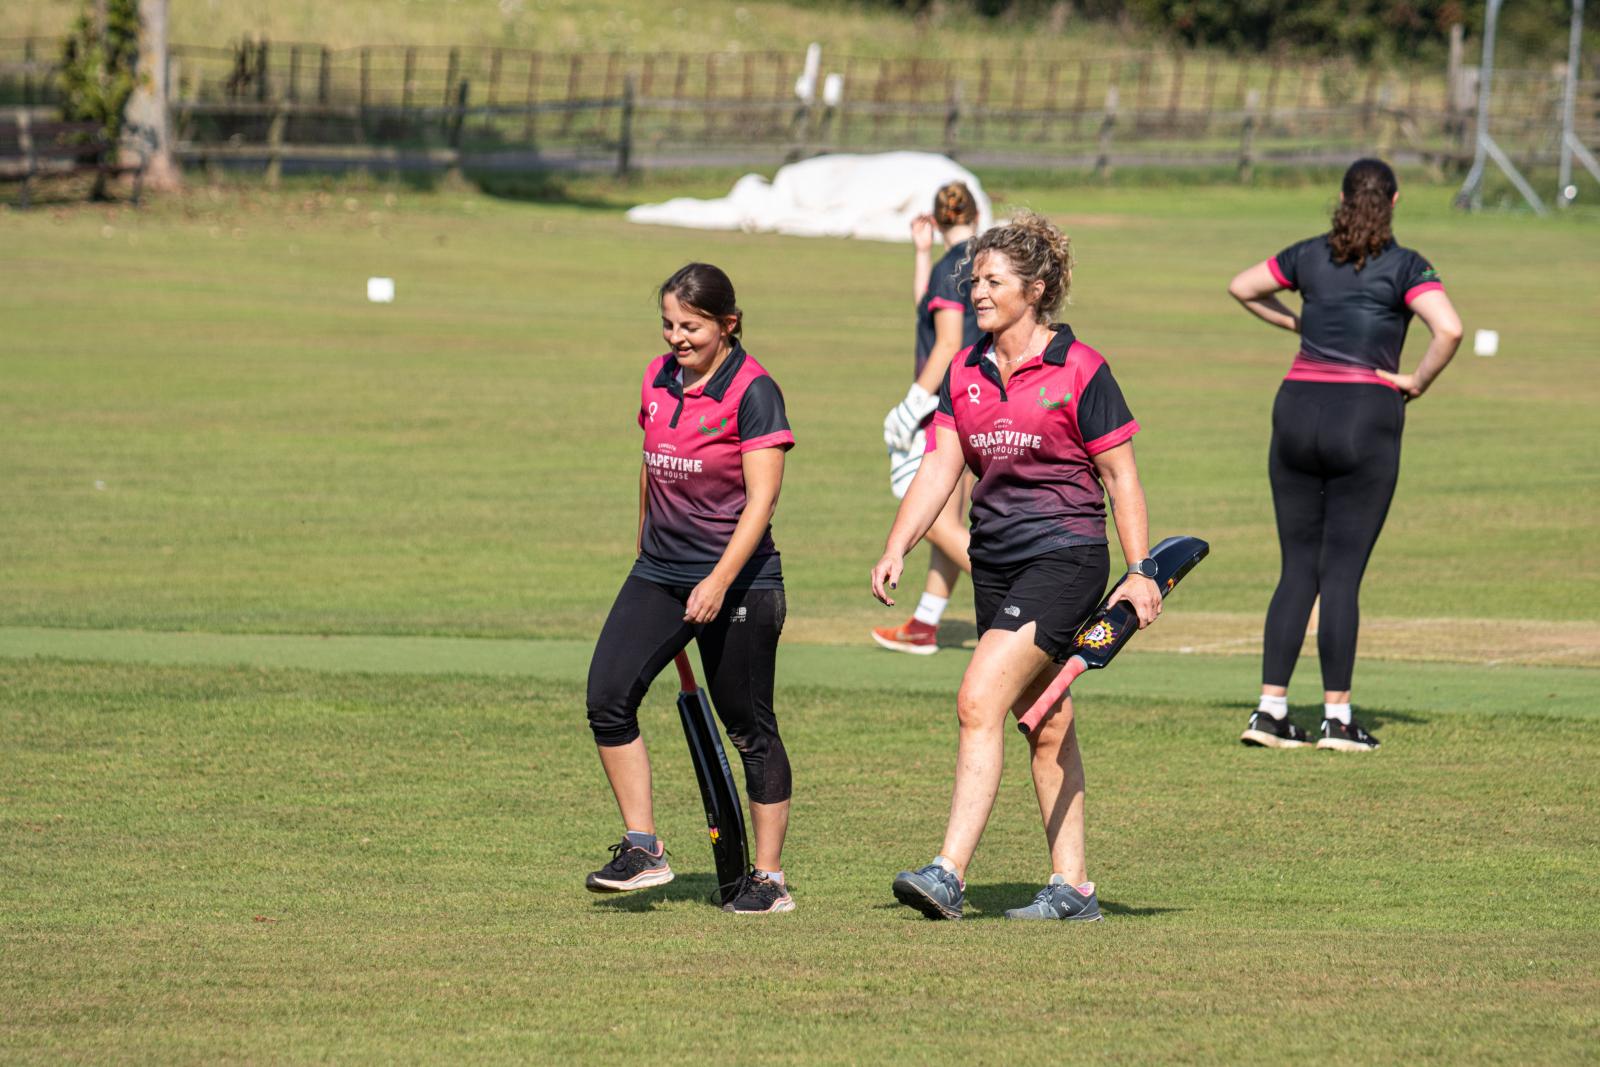 Winning both the semi-finals, Exmouth CC provided both teams for the Devon Women's Softball League finals.